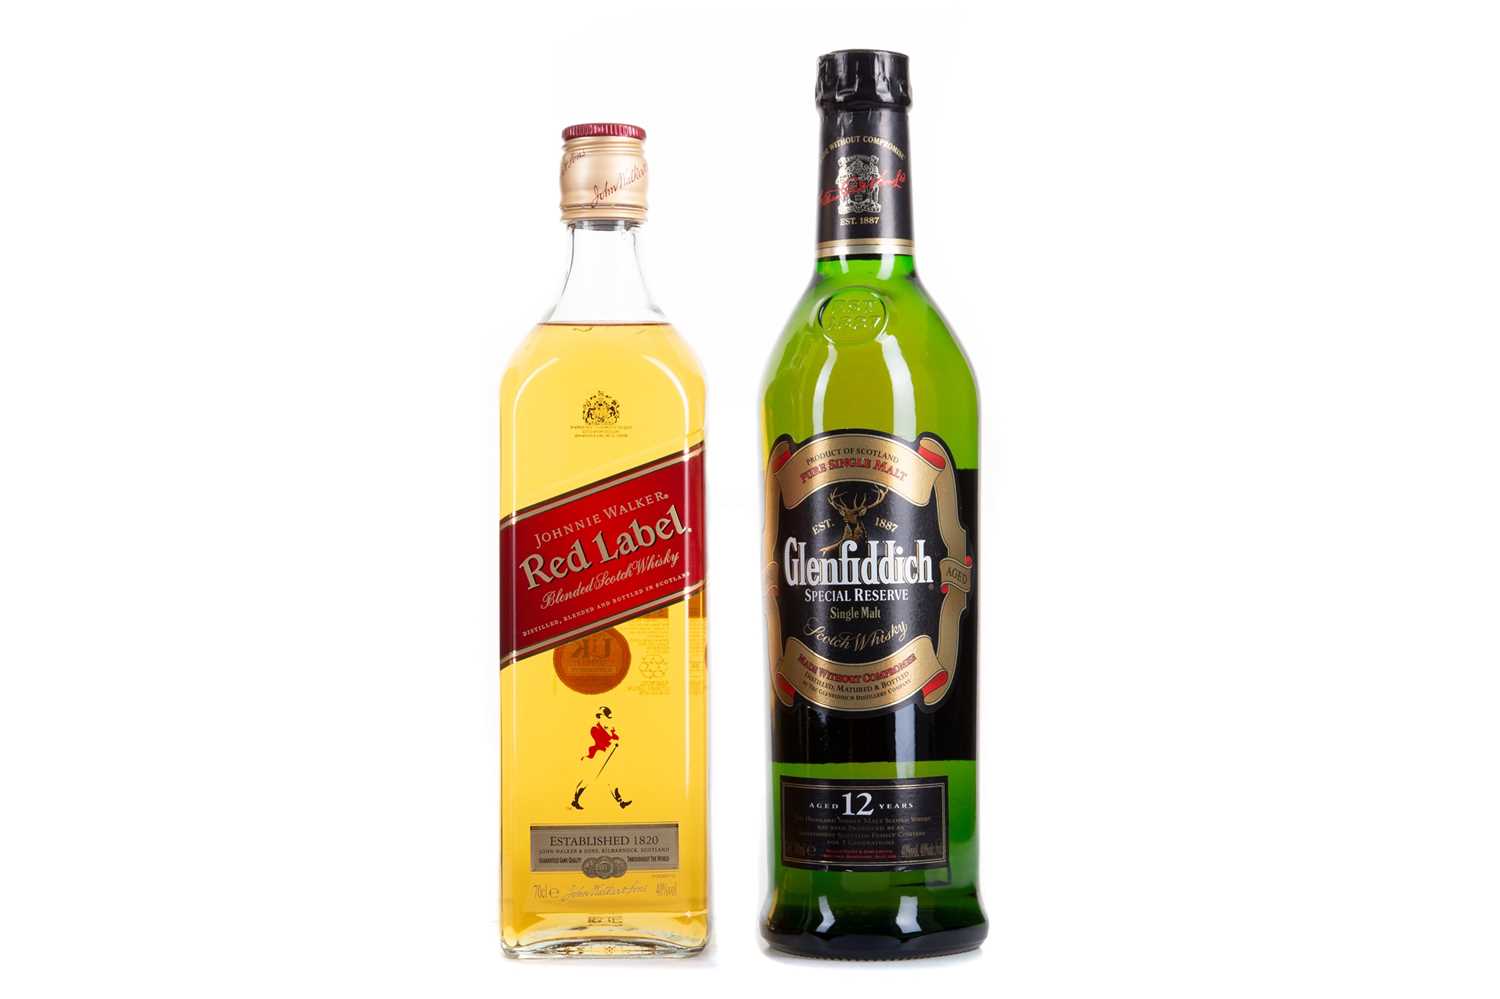 Lot 90 - GLENFIDDICH 12 YEAR OLD SPECIAL RESERVE AND JOHNNIE WALKER RED LABEL